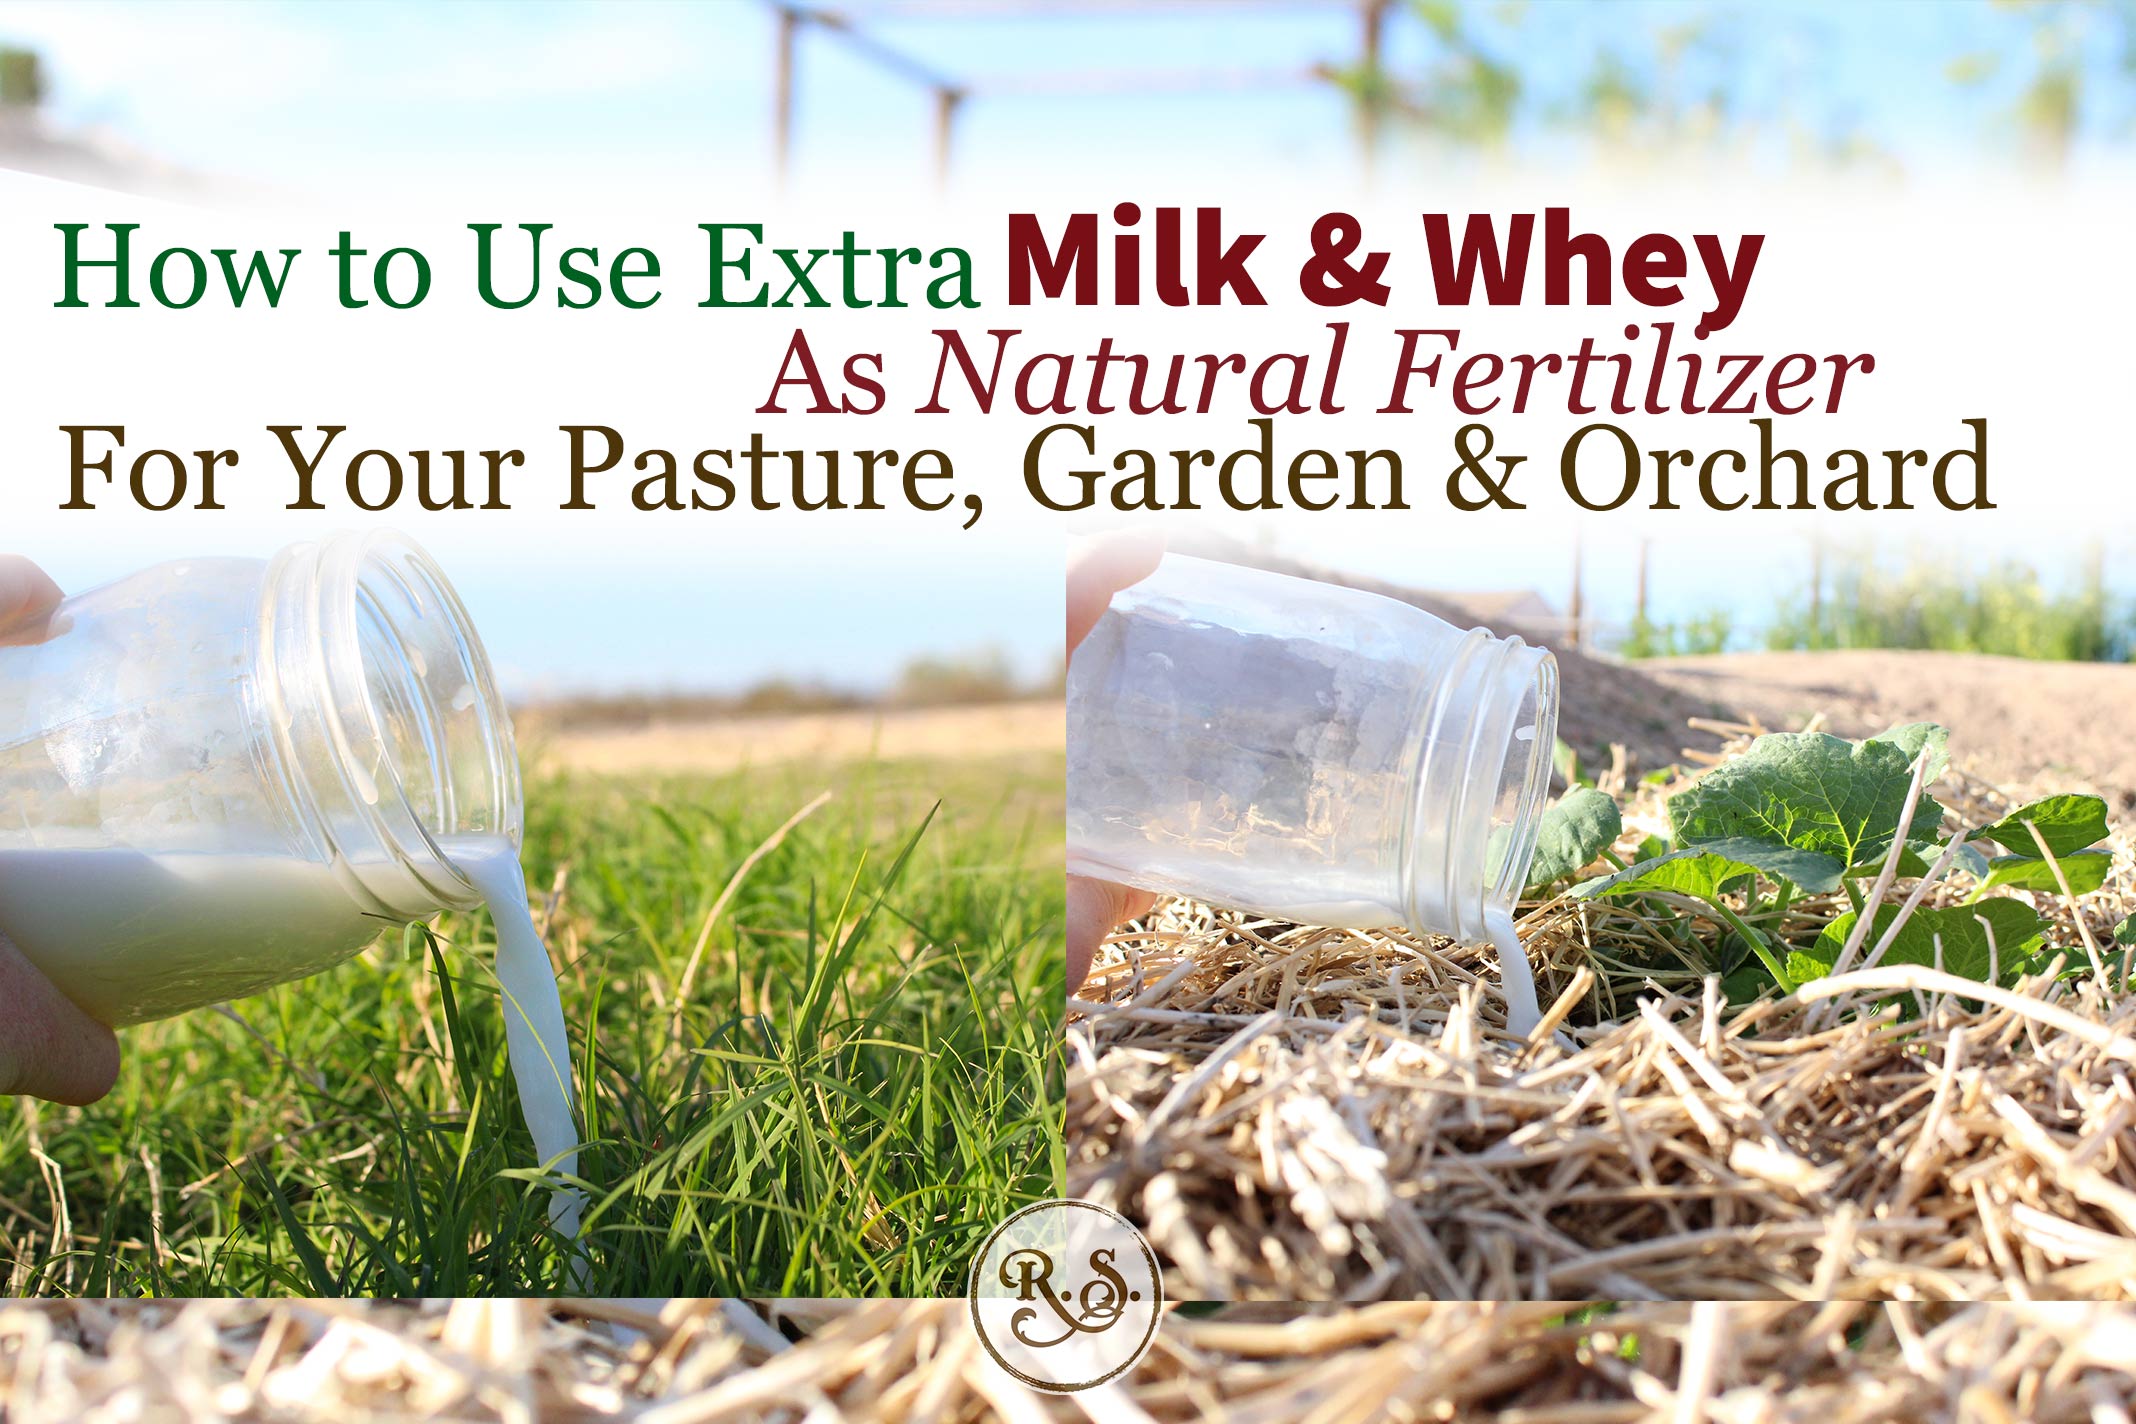 Extra milk or whey is an amazing fertilizer to build Organic fertility! In your orchard, pasture and garden it is a completely natural, holistic and Organic option.